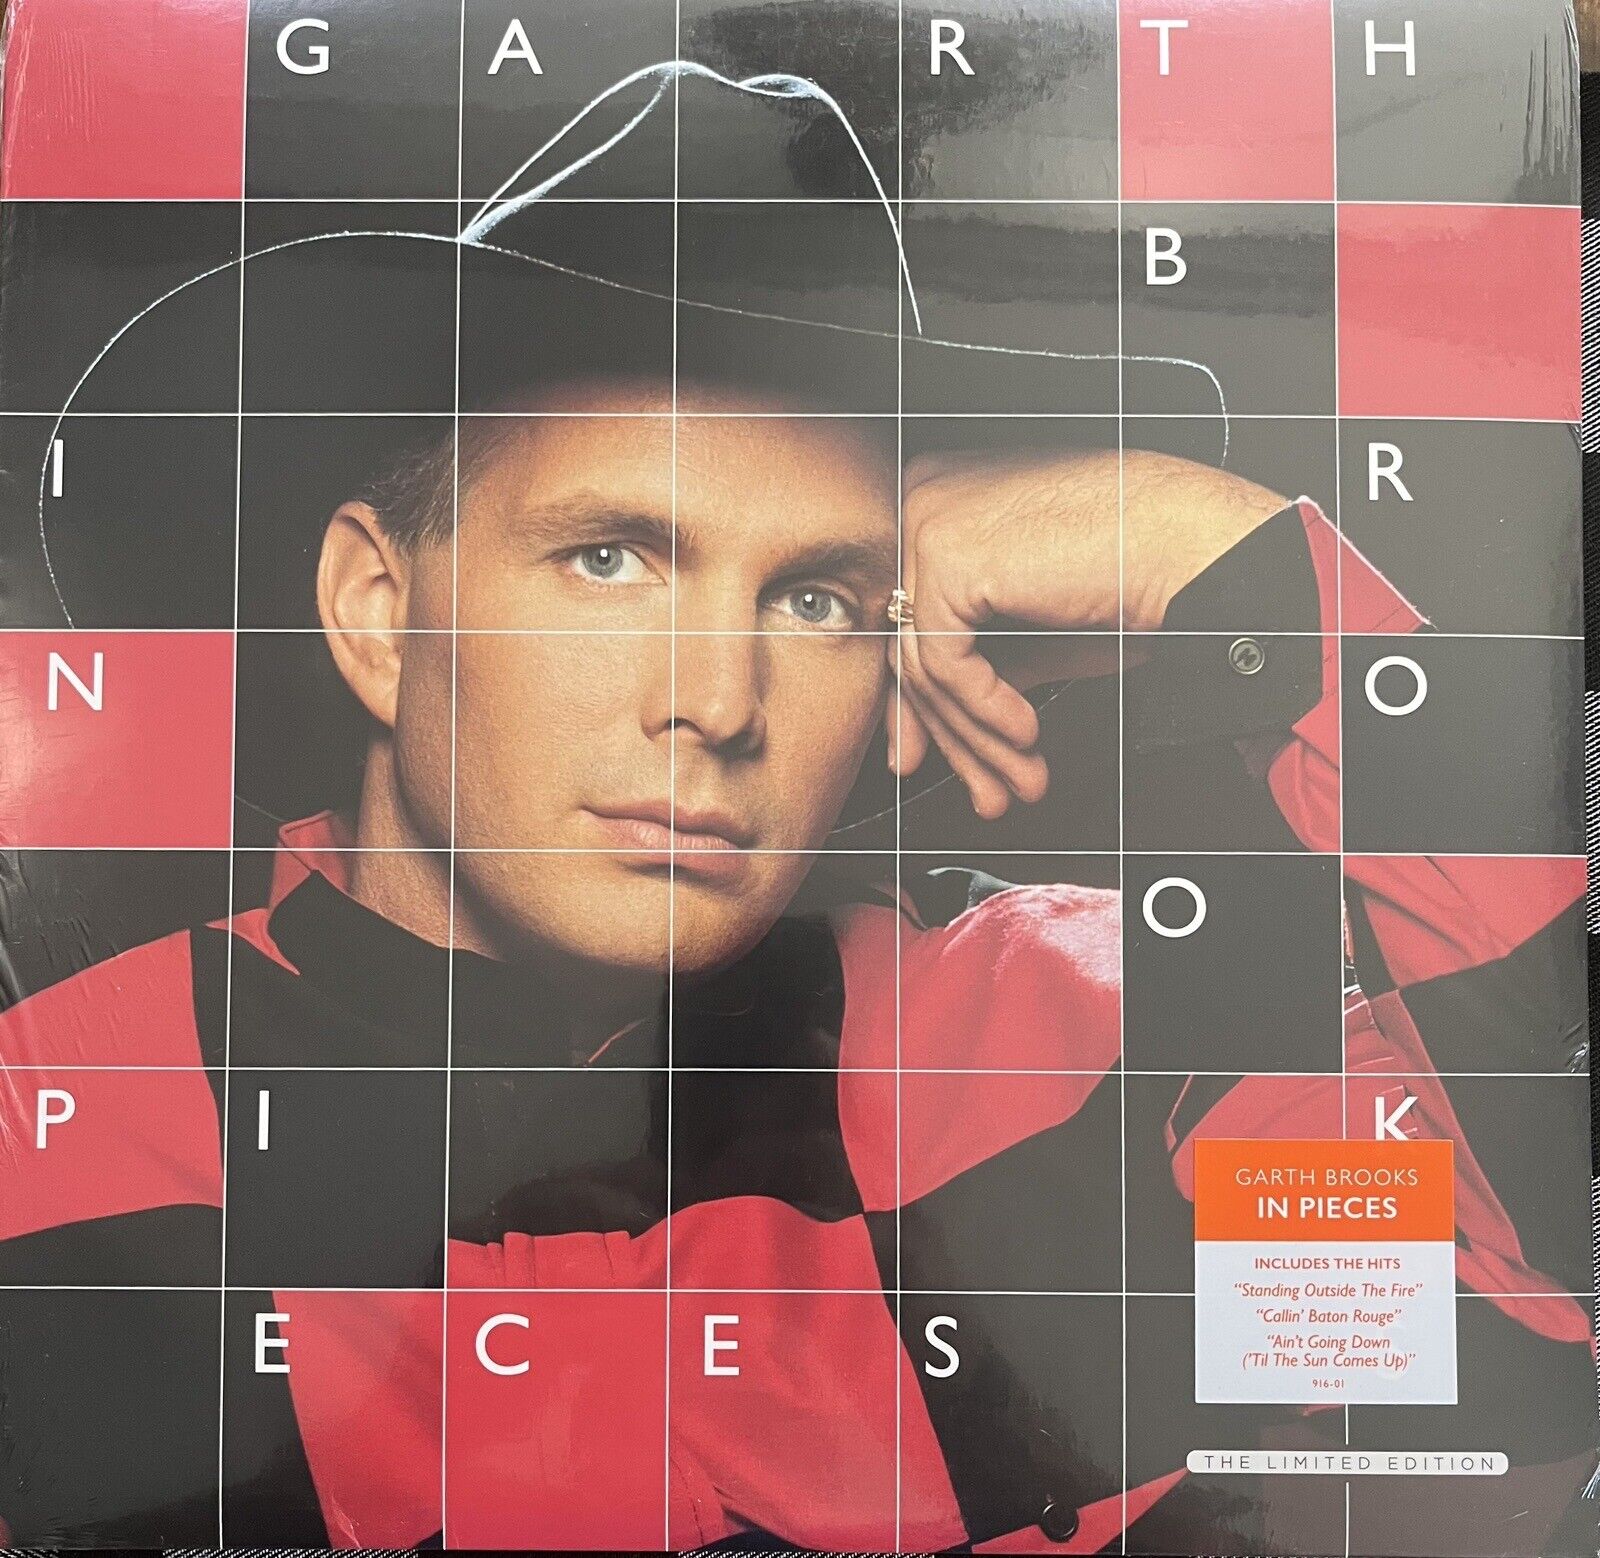 GARTH BROOKS " IN PIECES " The Limited Edition VINYL LP RECORD ⭐⭐SEALED⭐⭐